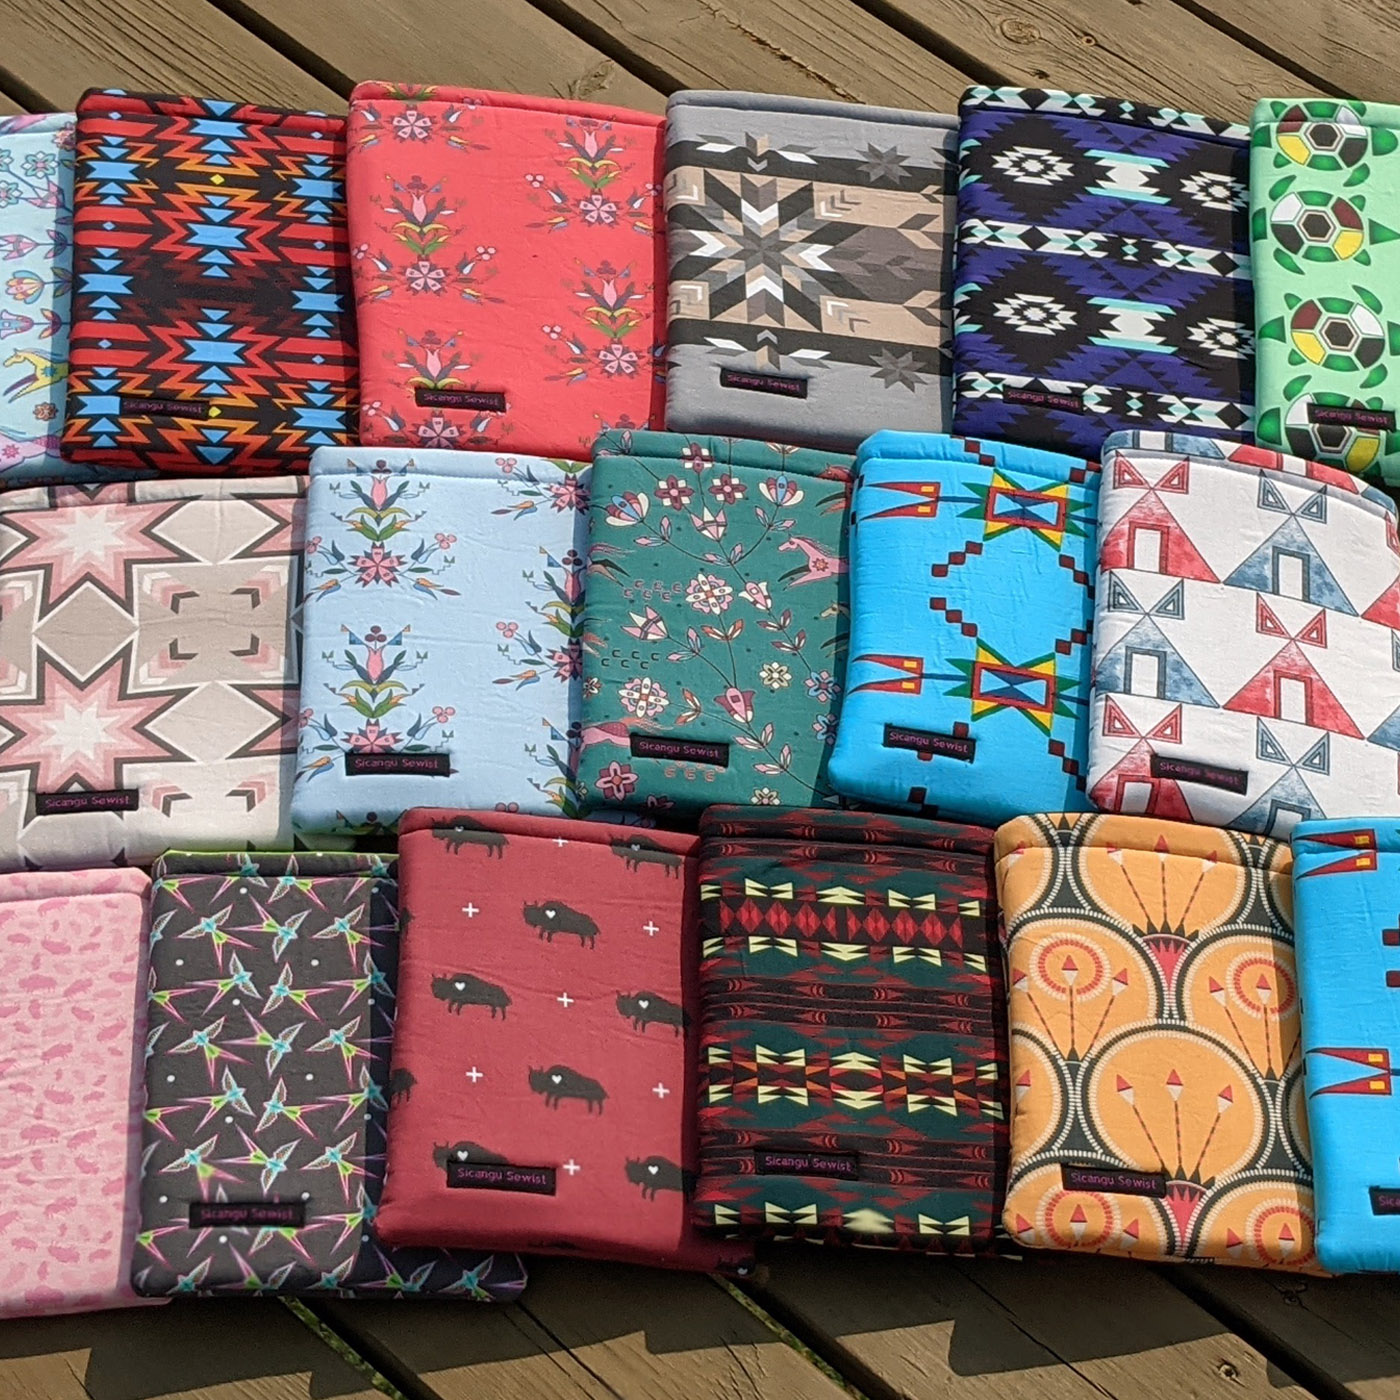 A group of handmade book sleeves created by Lorna "Emmy" Her Many Horses in a range of colors featuring some designs by the Indigenous artists featured in this blog post. Select styles are available on Emmy’s Etsy shop, The Sičángu Sewist.